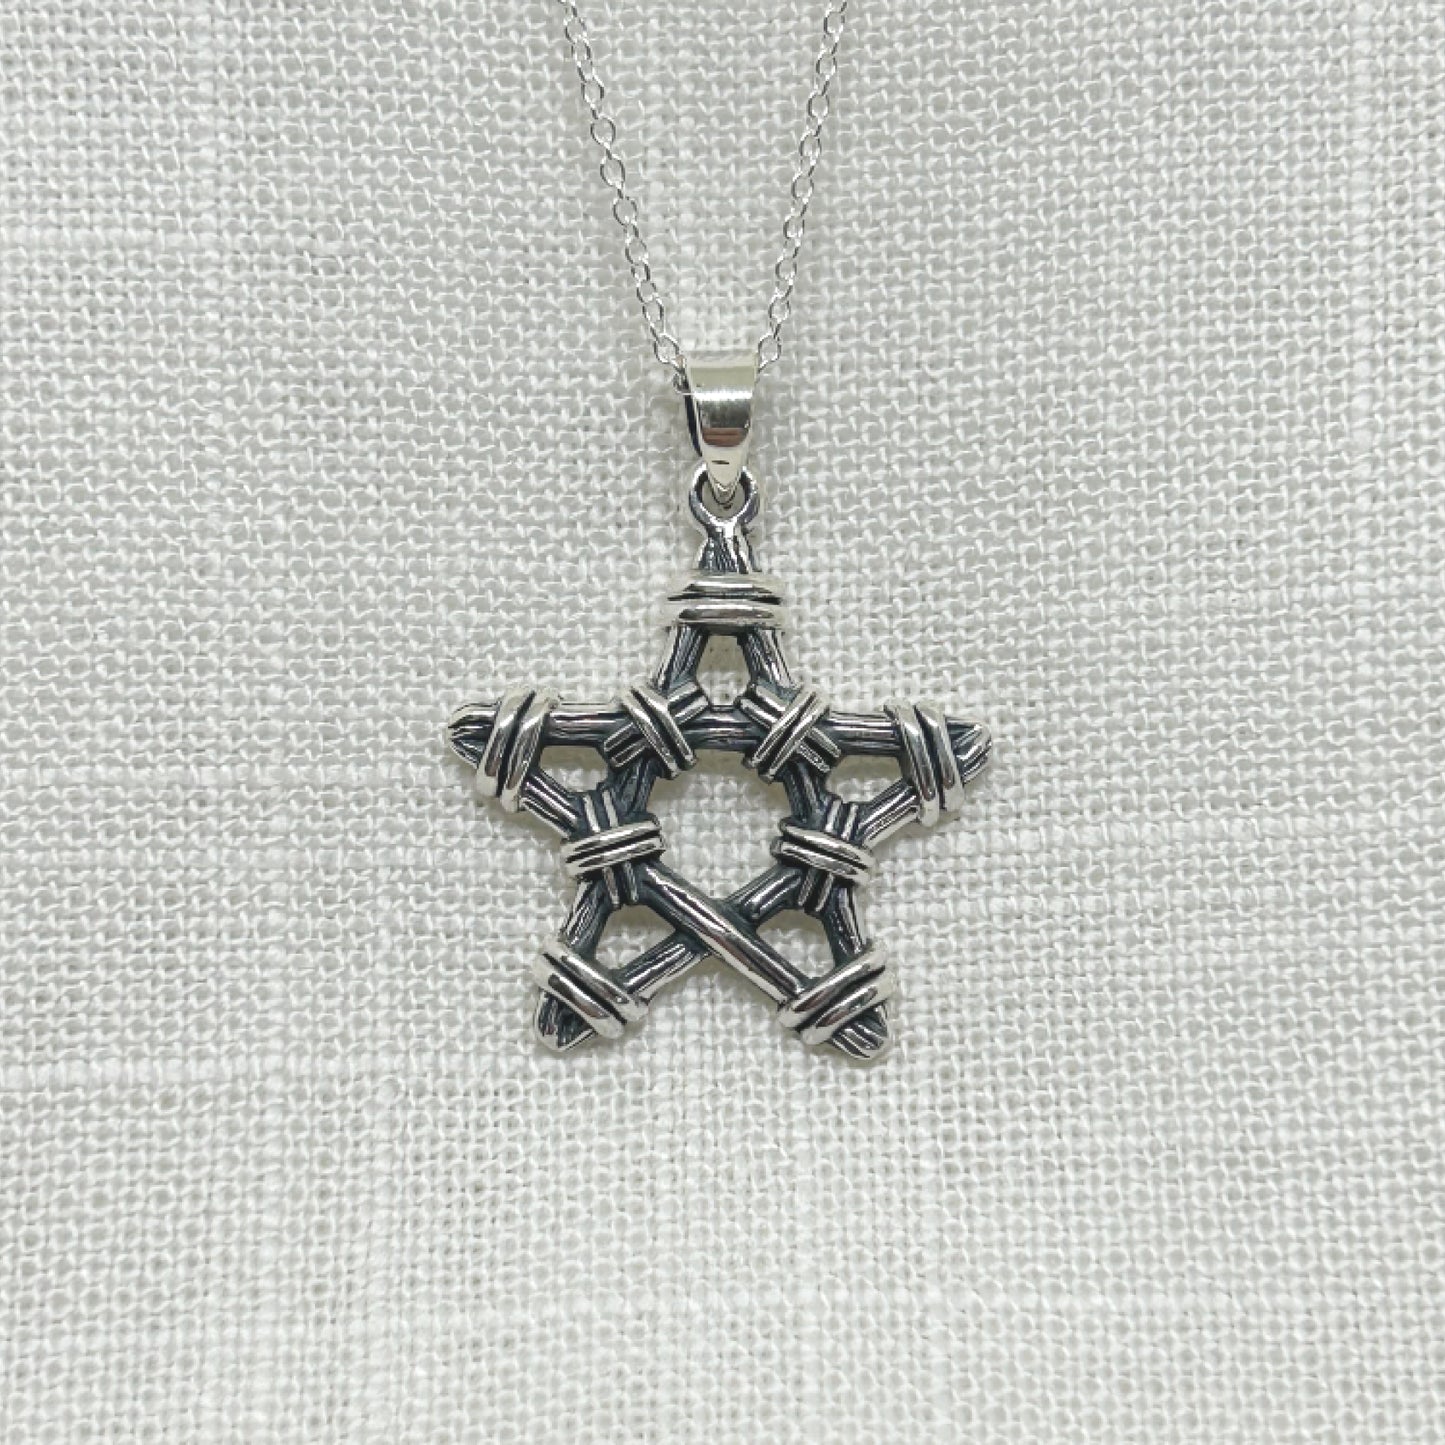 This beautifully crafted 925 silver pentagram necklace design is made by twigs and bound together with twine to create a realistic rustic look. Size is approx 3cm including the bale. It comes complete with a 20" sterling silver curb chain and is gift boxed.